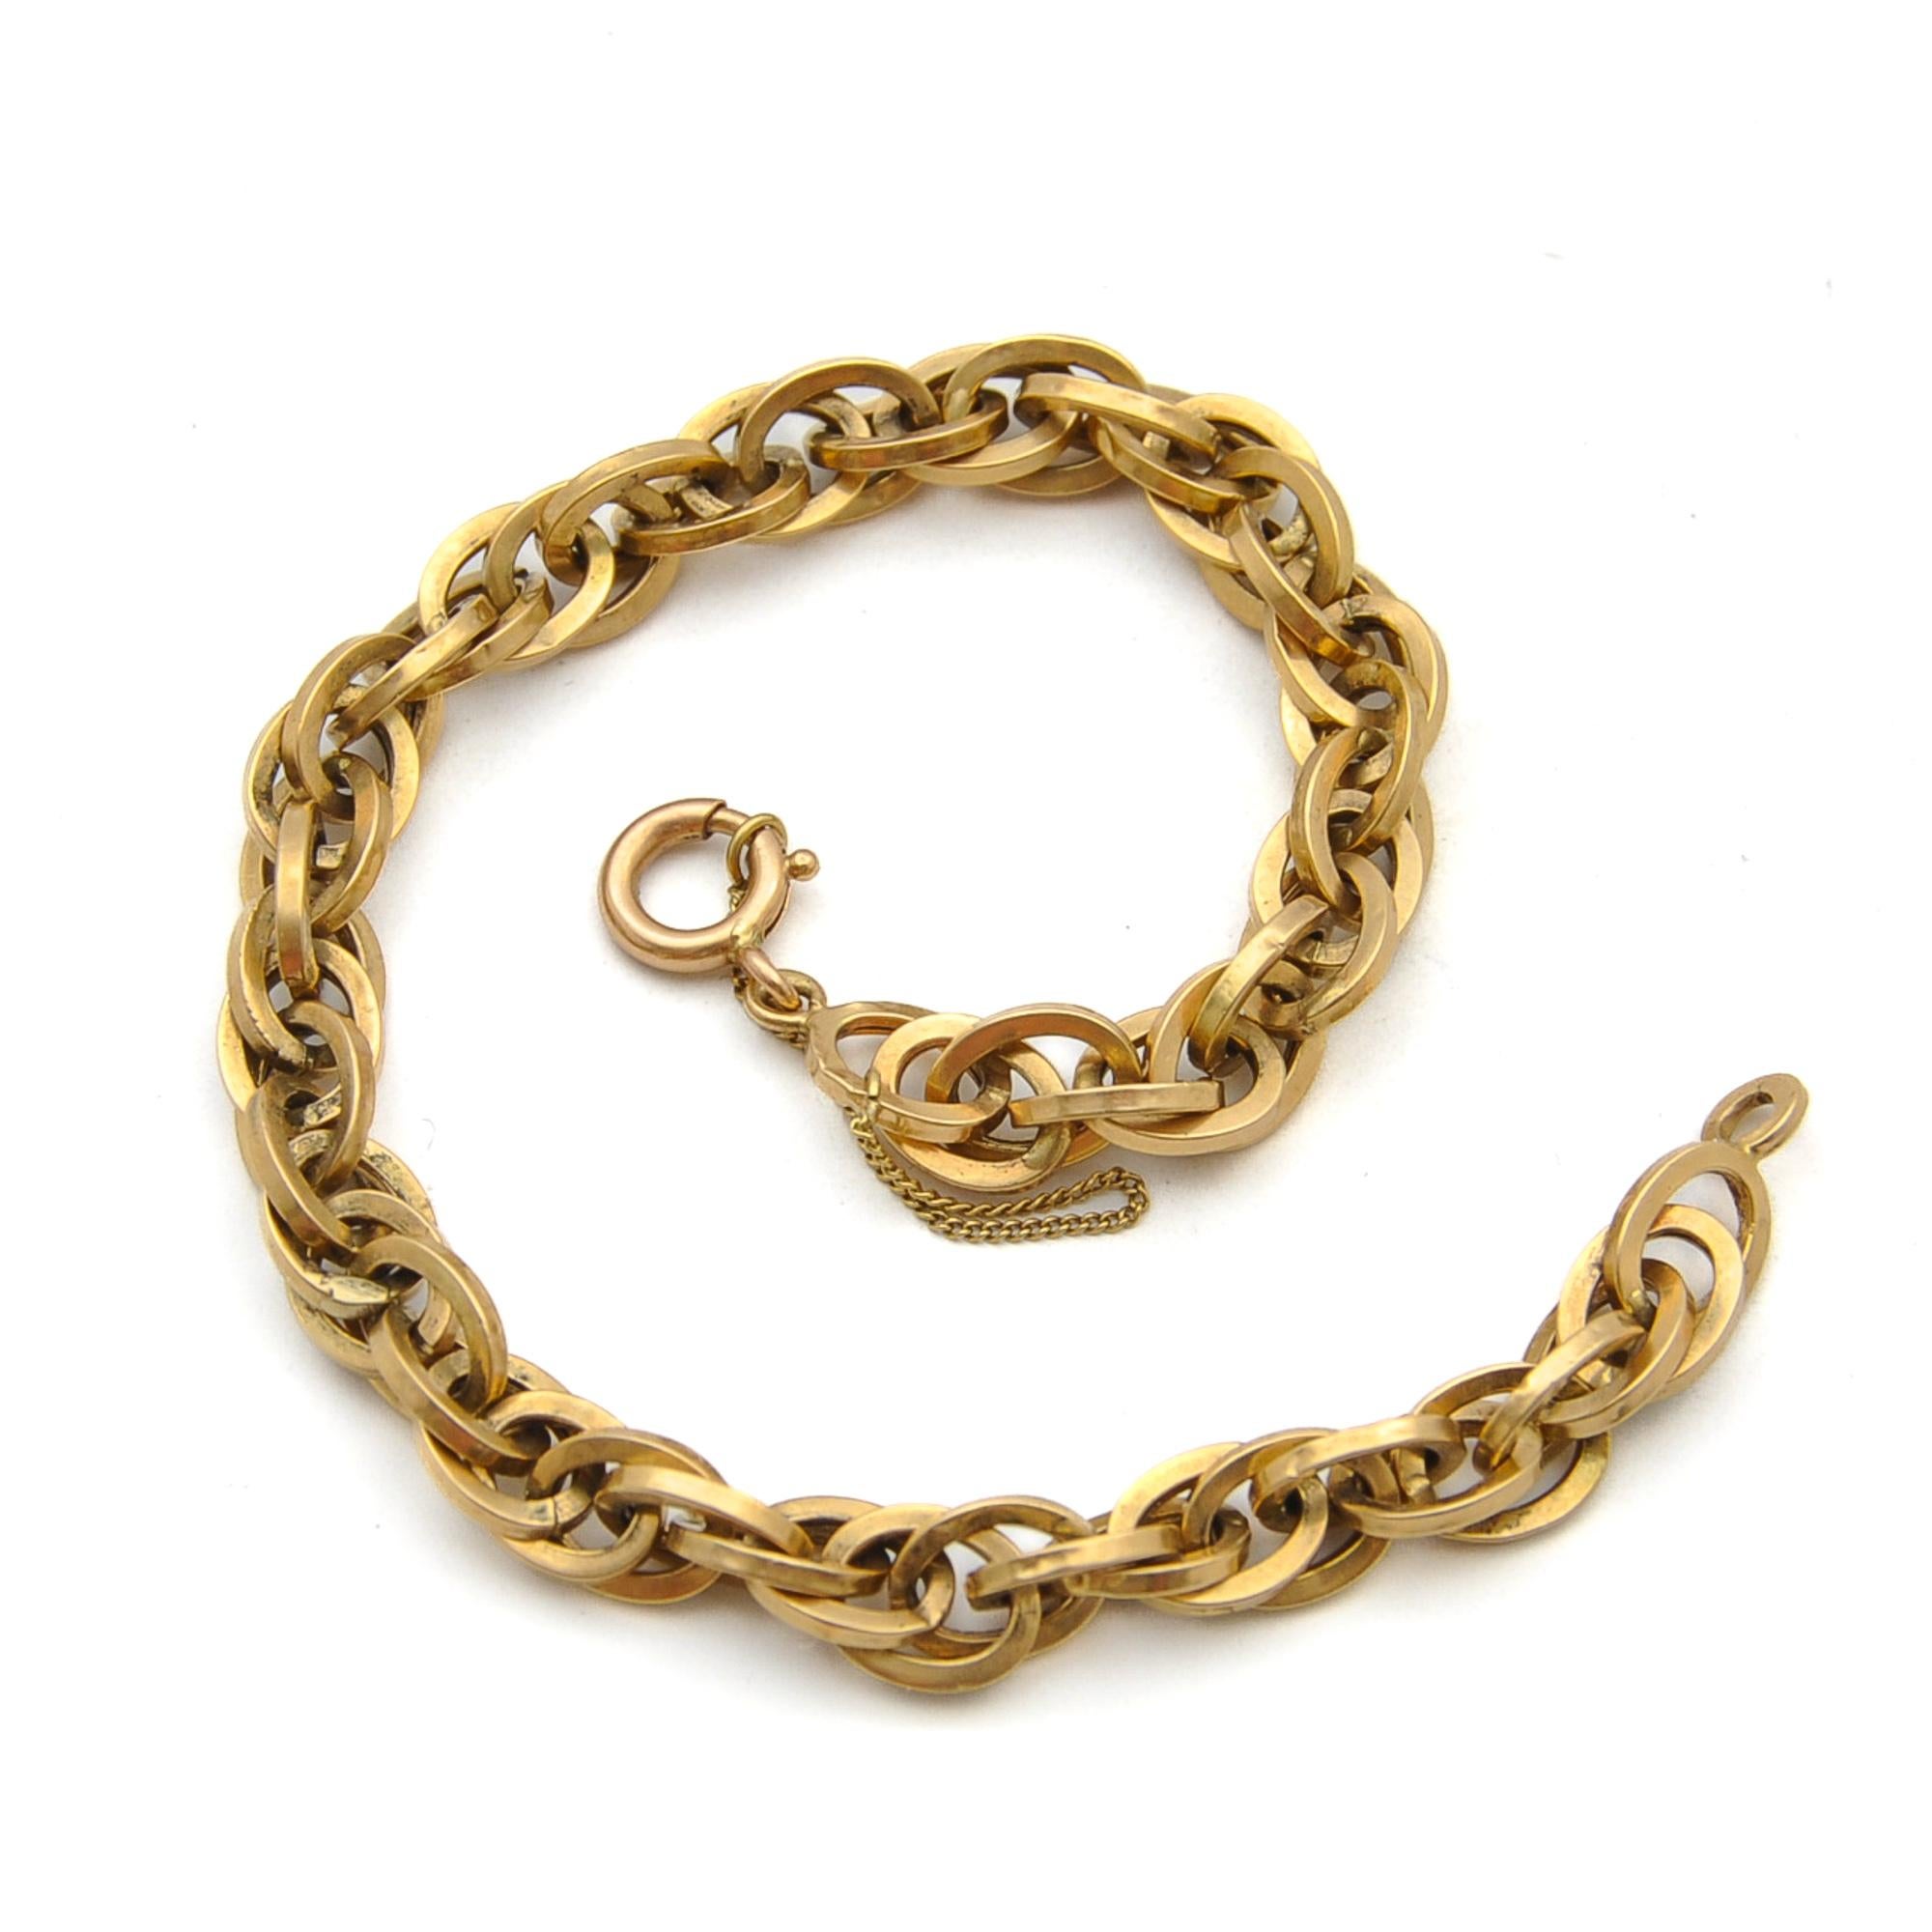 Vintage Italian 18K Gold Double Chain Link Bracelet In Good Condition For Sale In Rotterdam, NL